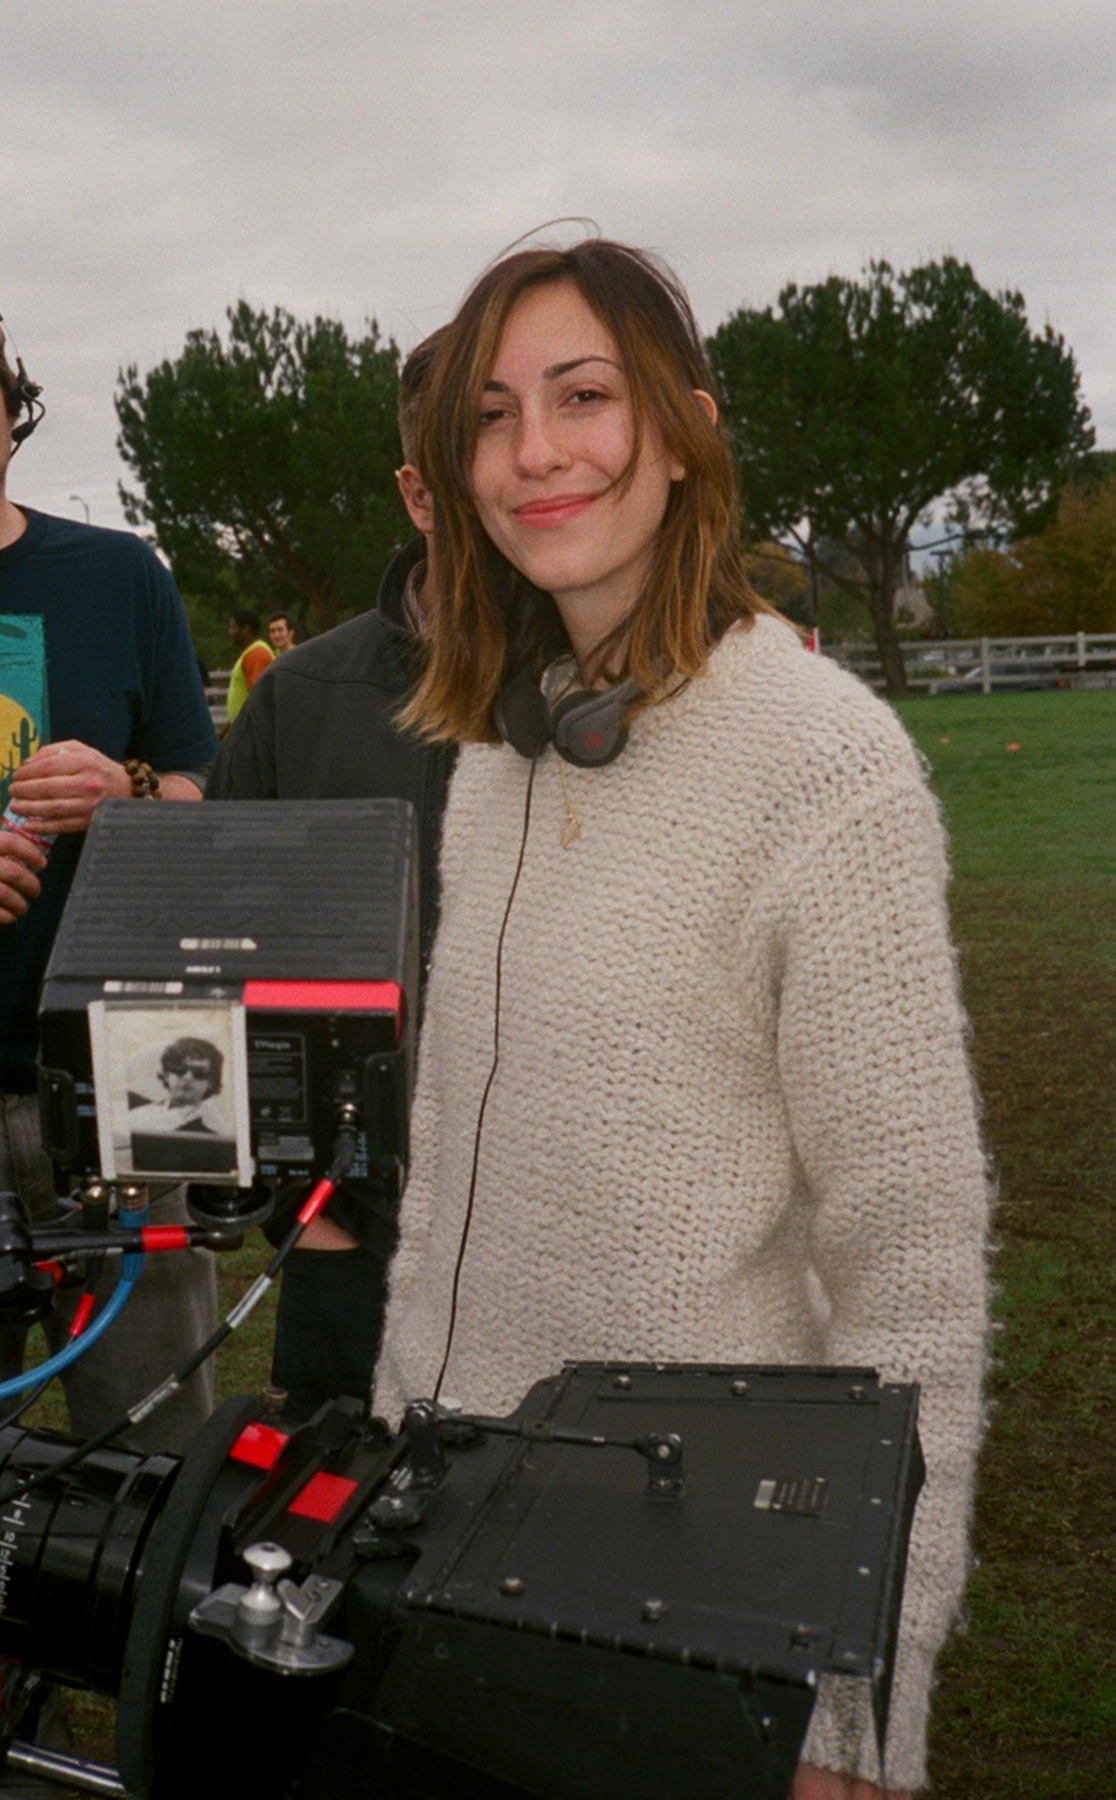 Gia Coppola, director of PALO ALTO, playing at the San Francisco International Film Festival, Apil 24- May 8, 2014.